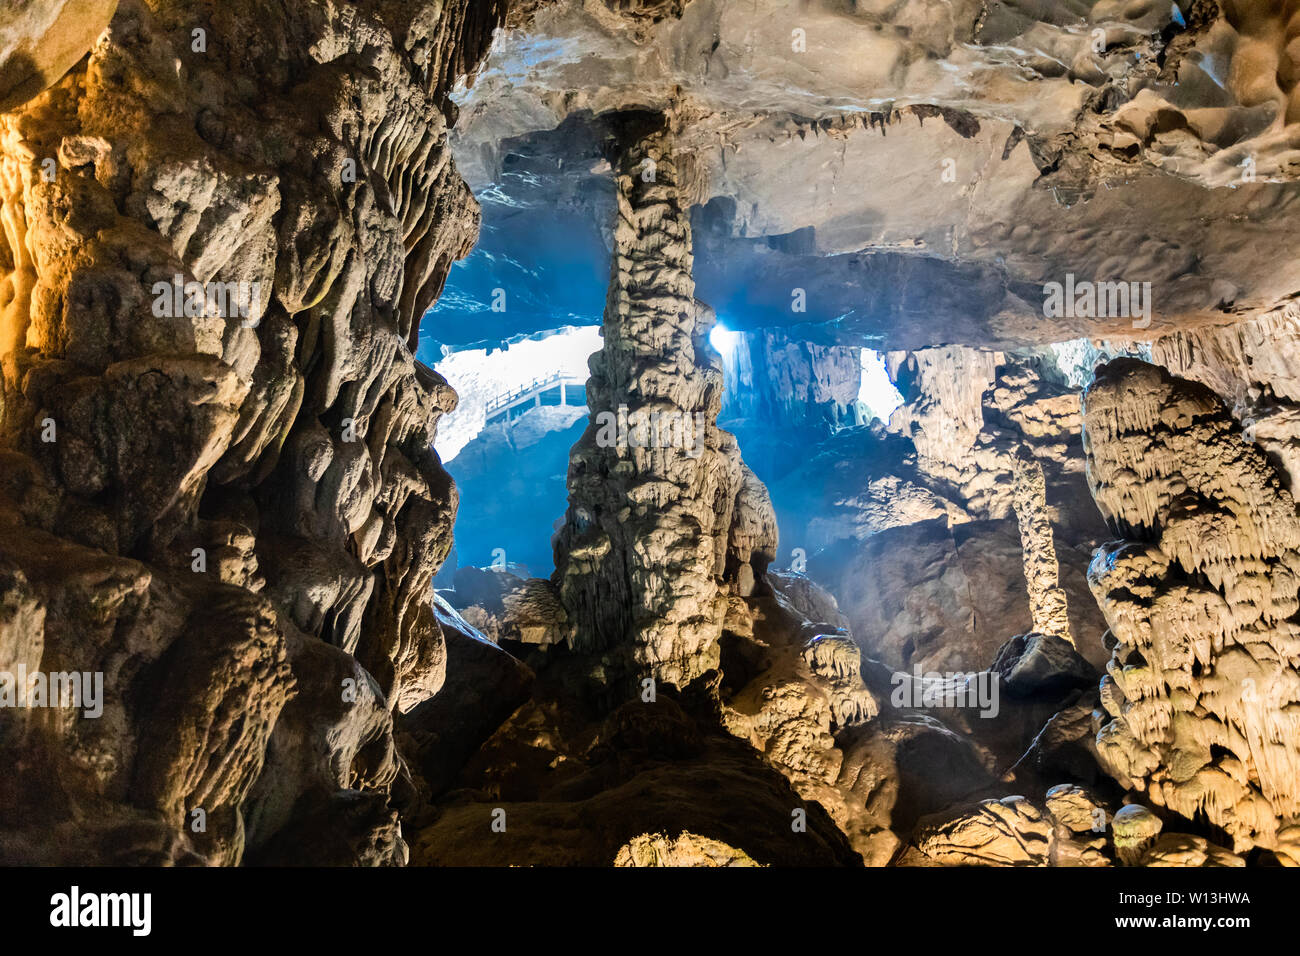 Beautiful geological formation of stalagmite in Sun Sot Cave at Ha Long Bay, Vietnam. Stock Photo